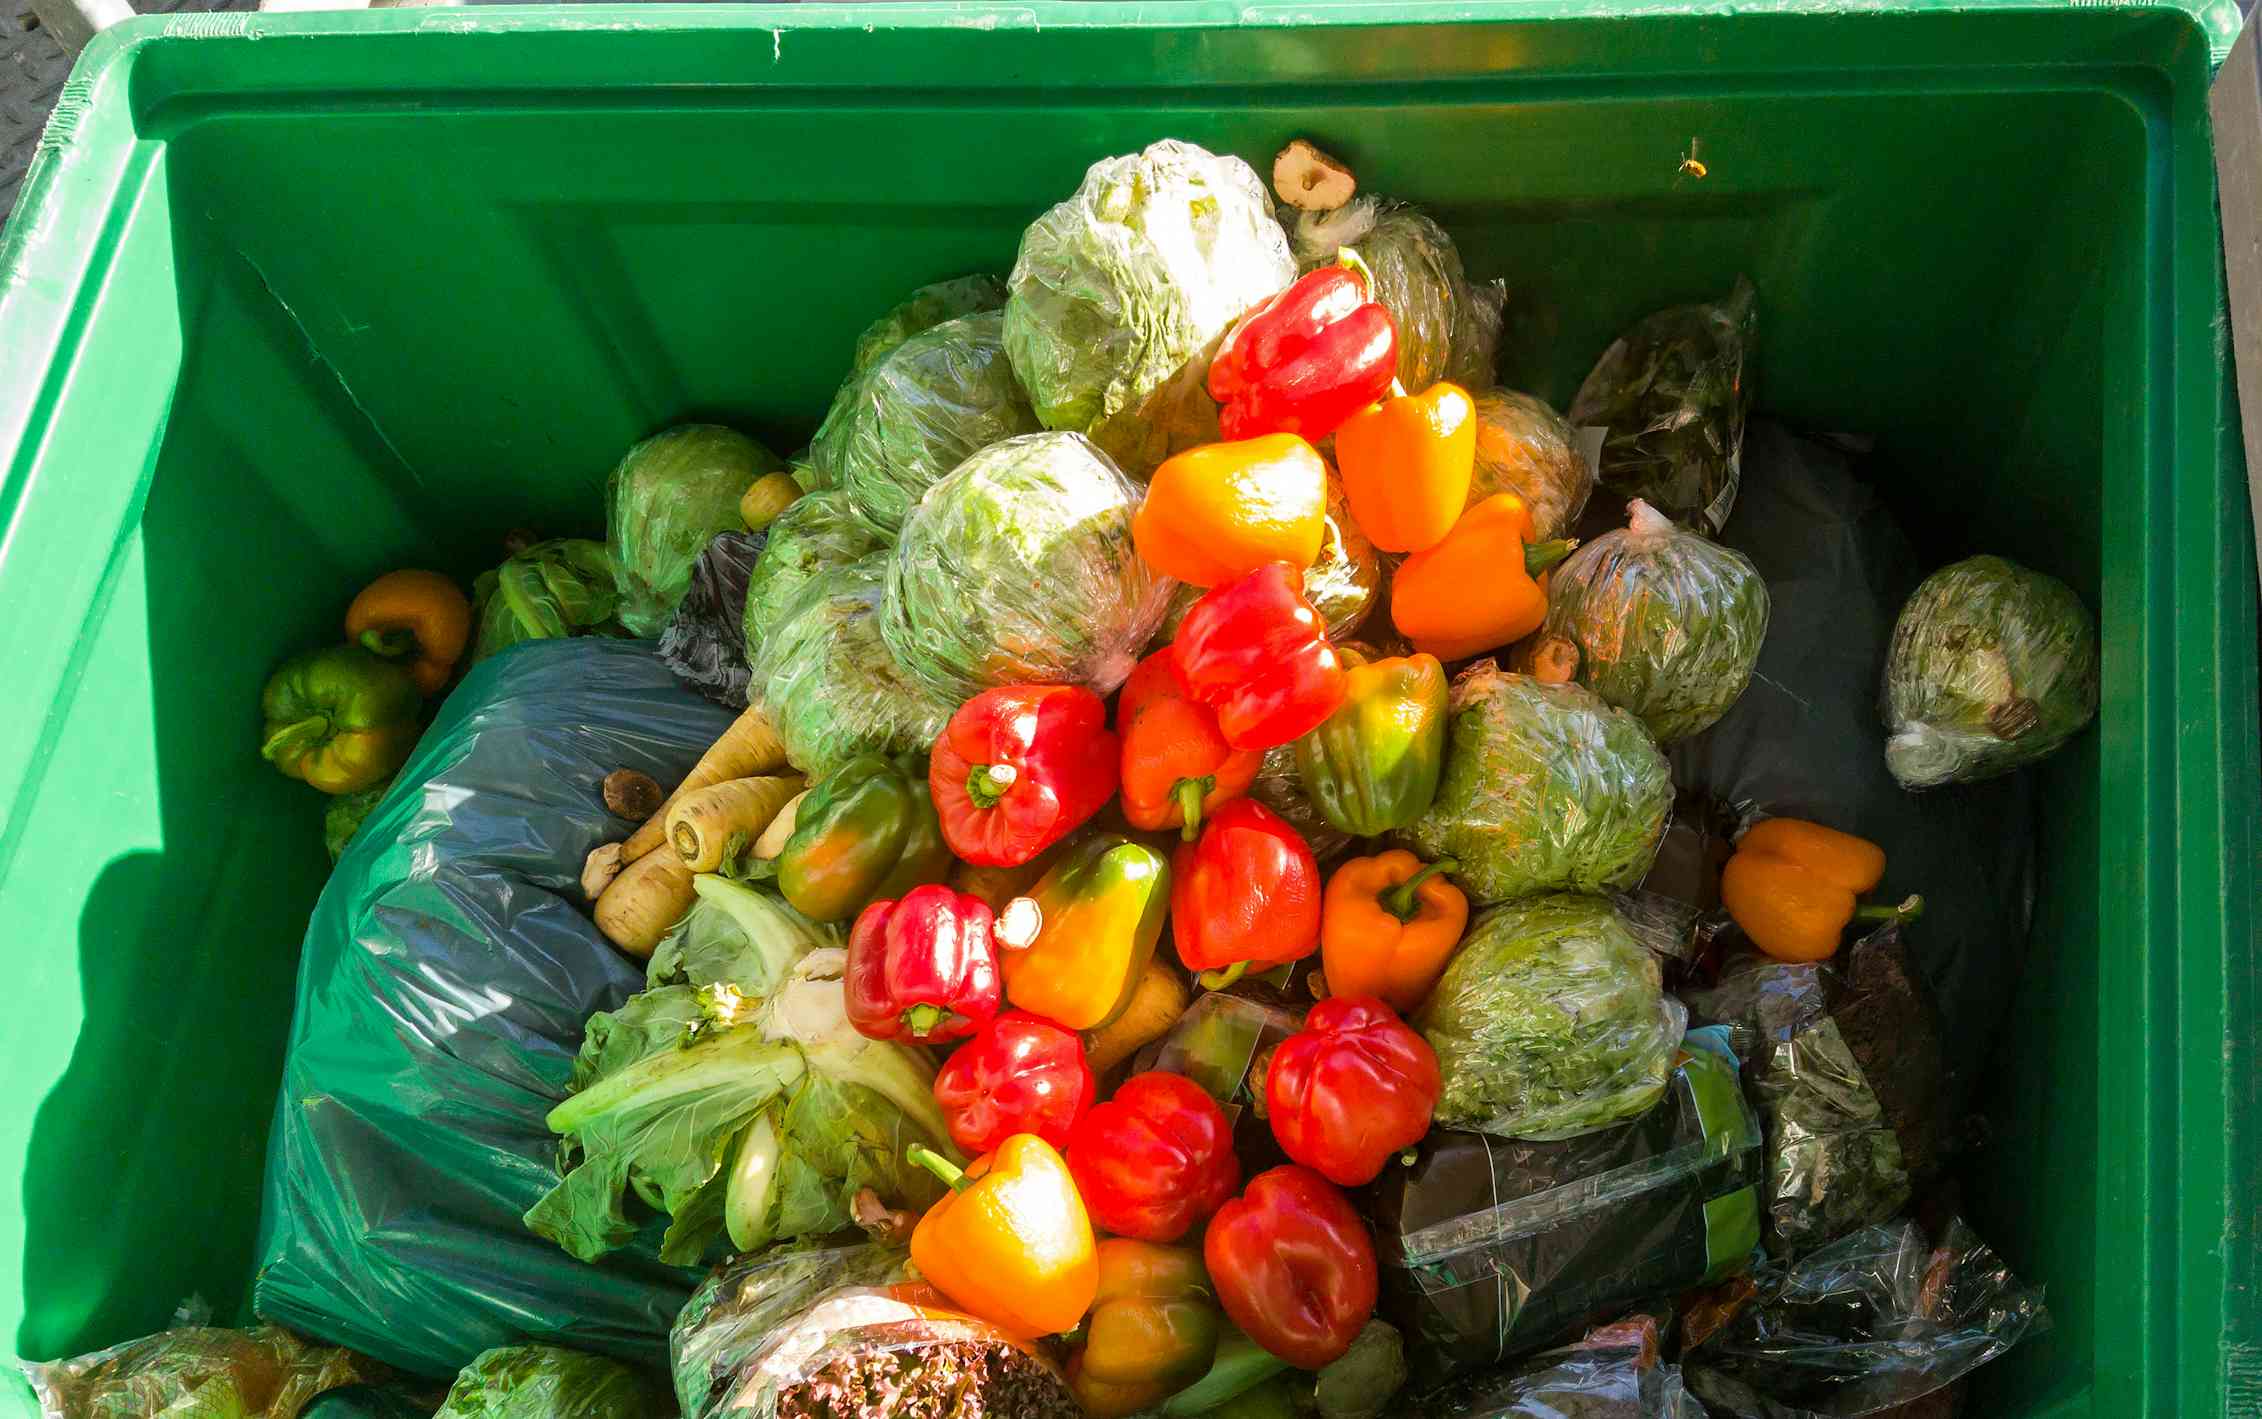 We throw away a third of the food we grow – here’s what to do about waste